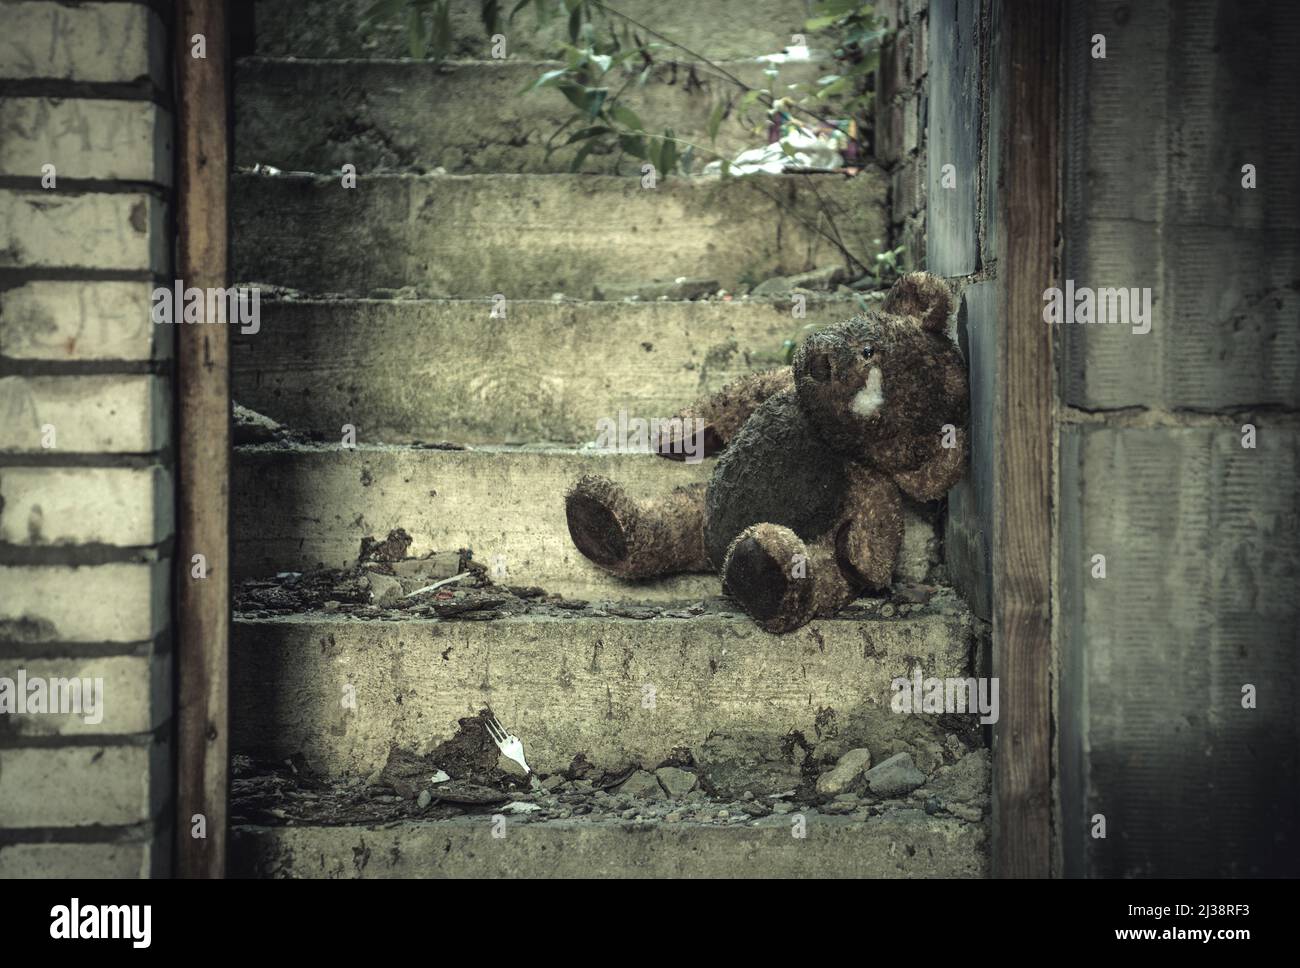 War Crimes Against Humanity Concept with Damaged Half Burned Teddy Bear Inside Residential House Ruins. Stock Photo